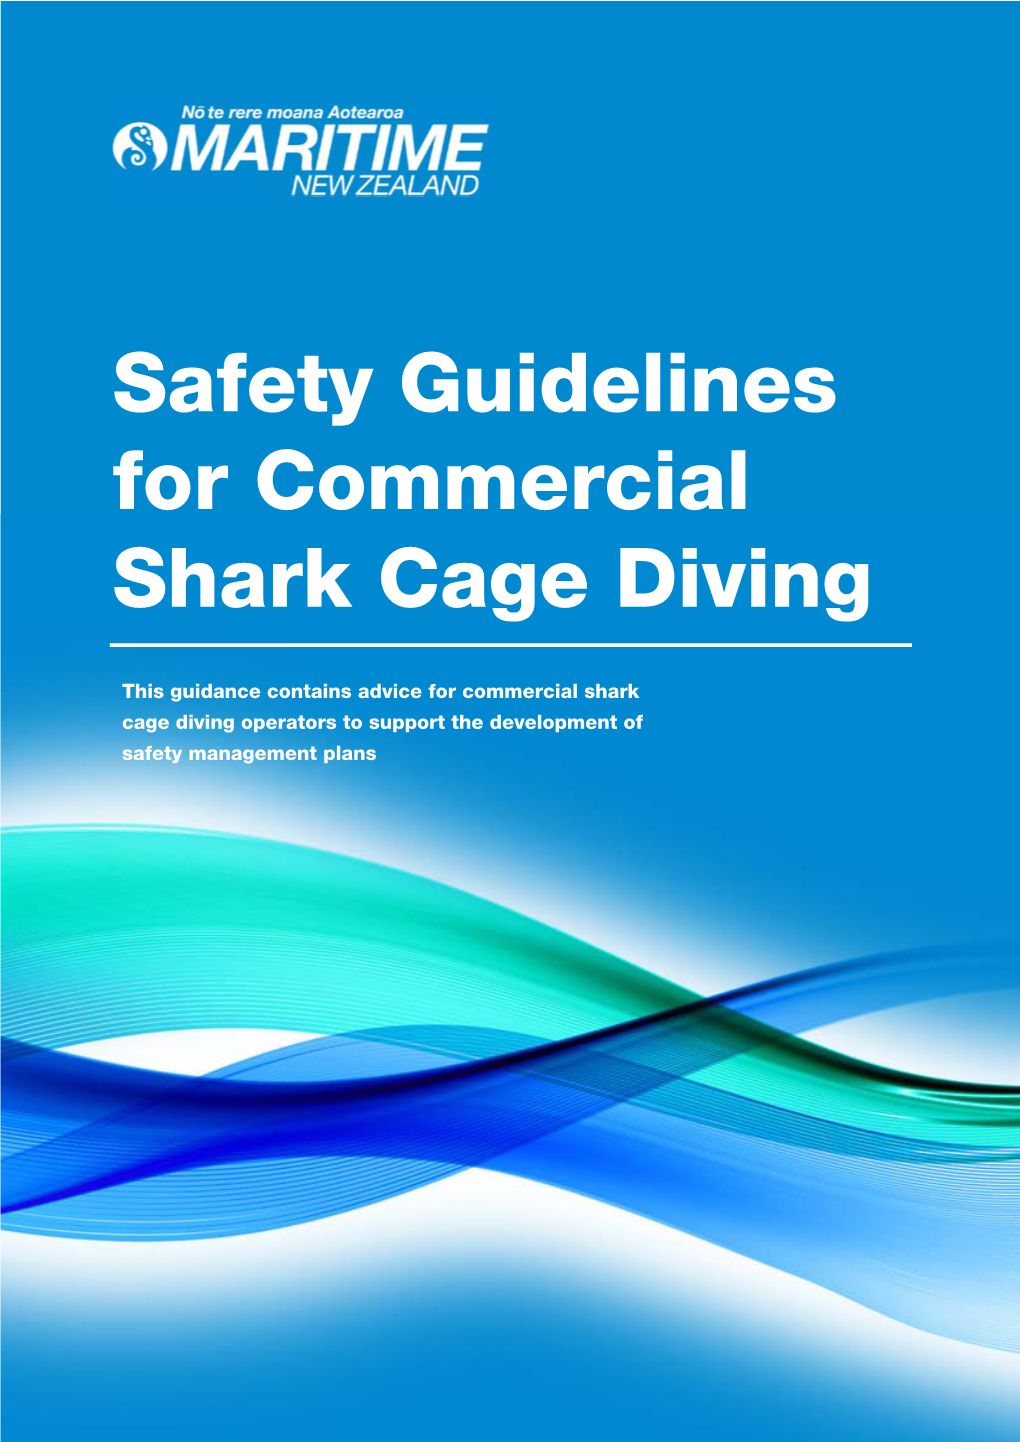 Safety Guidelines for Commercial Shark Cage Diving